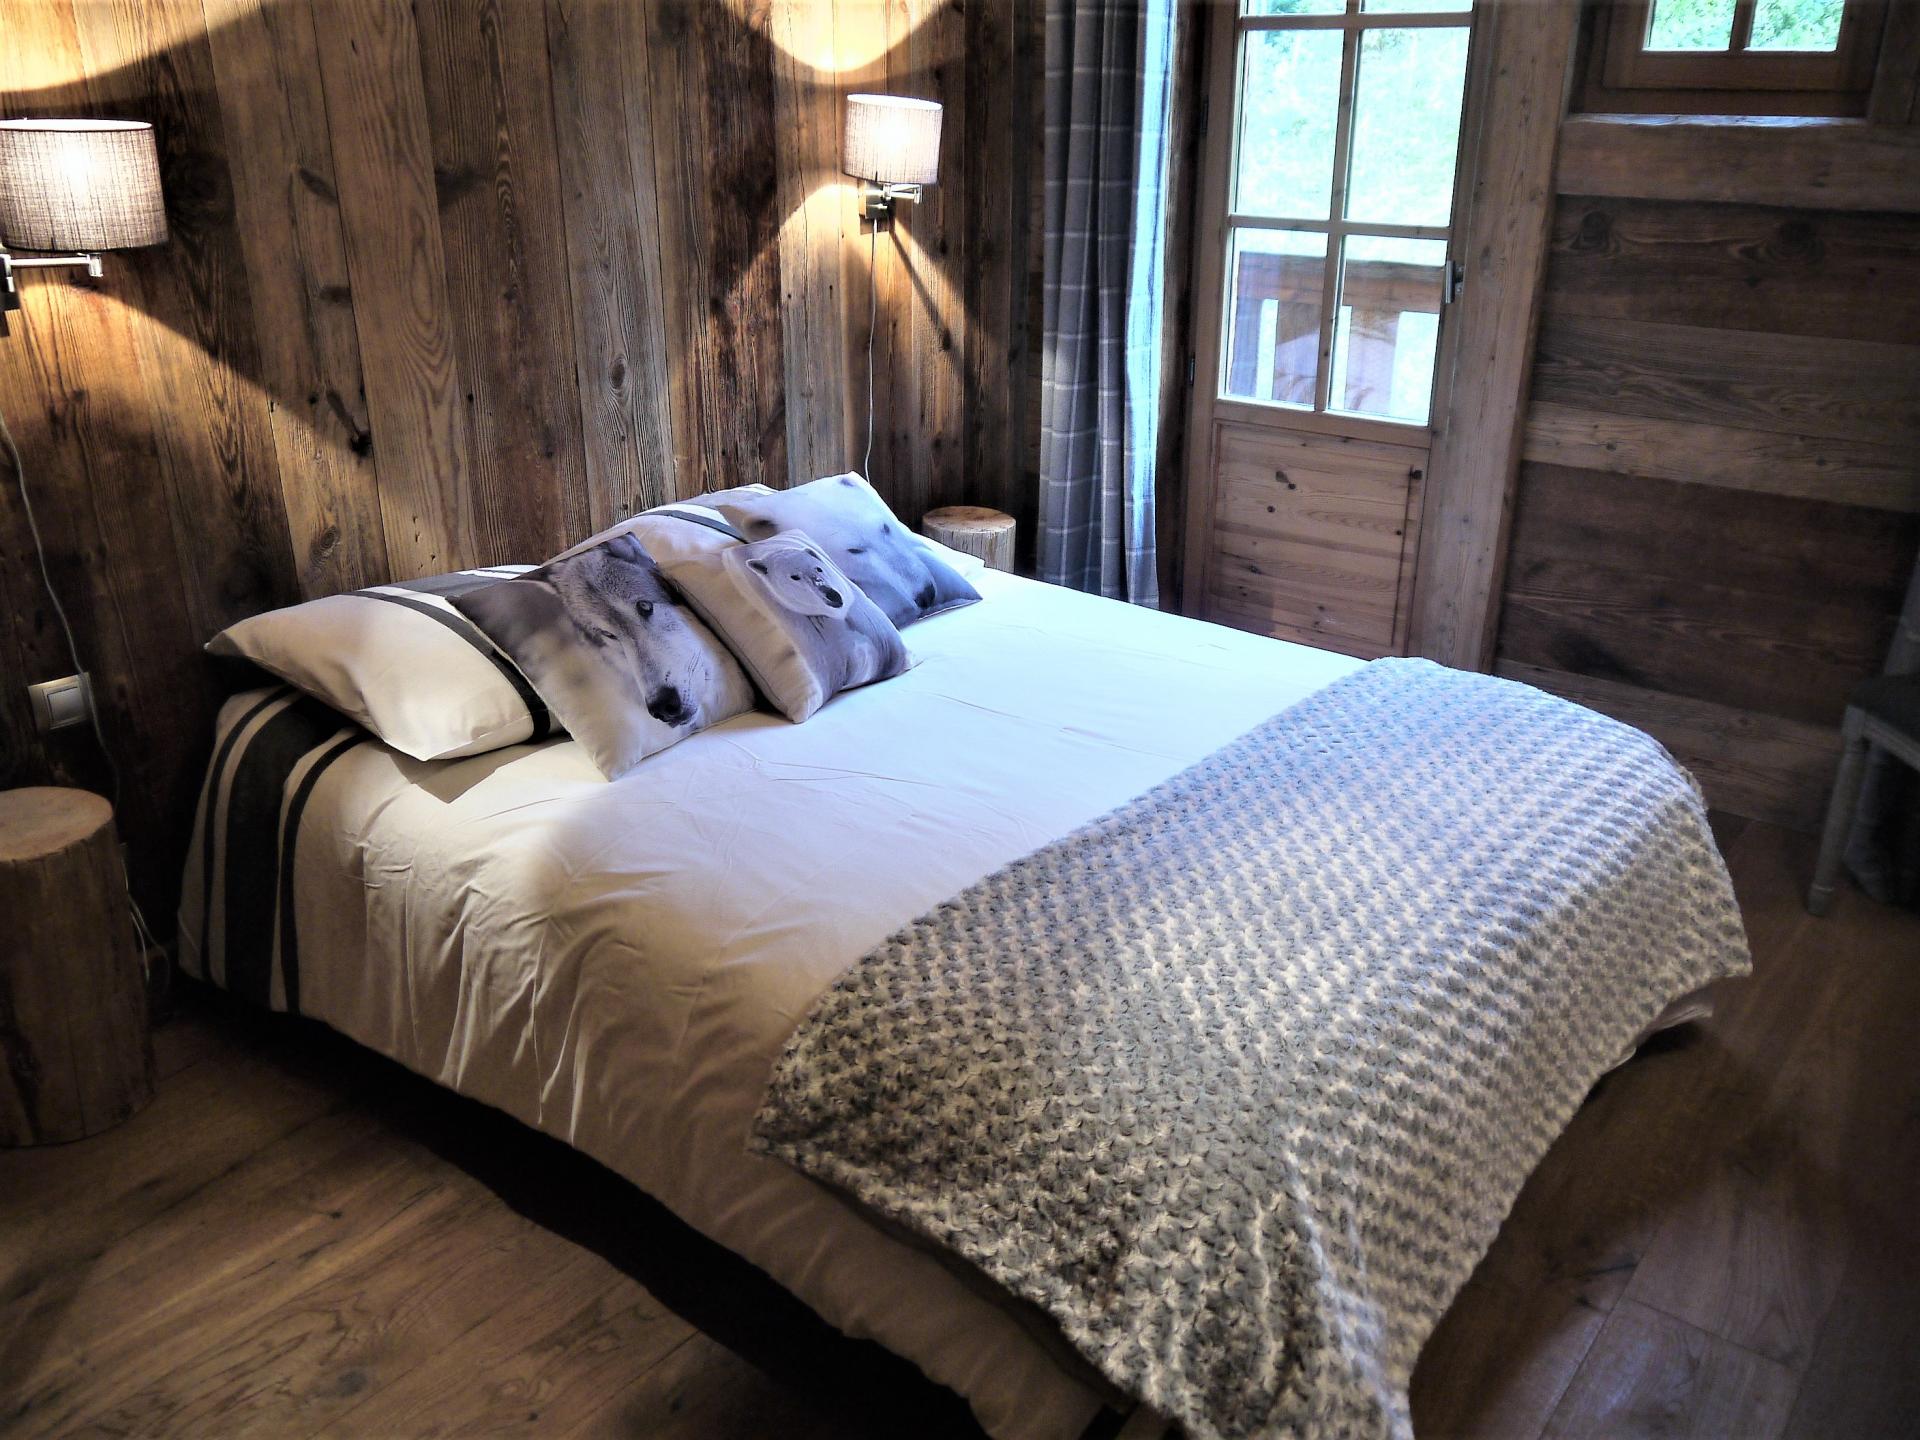 ANOTHER BEAUTIFUL BEDROOM IN A CHALET FOR WINTER HOLIDAYS